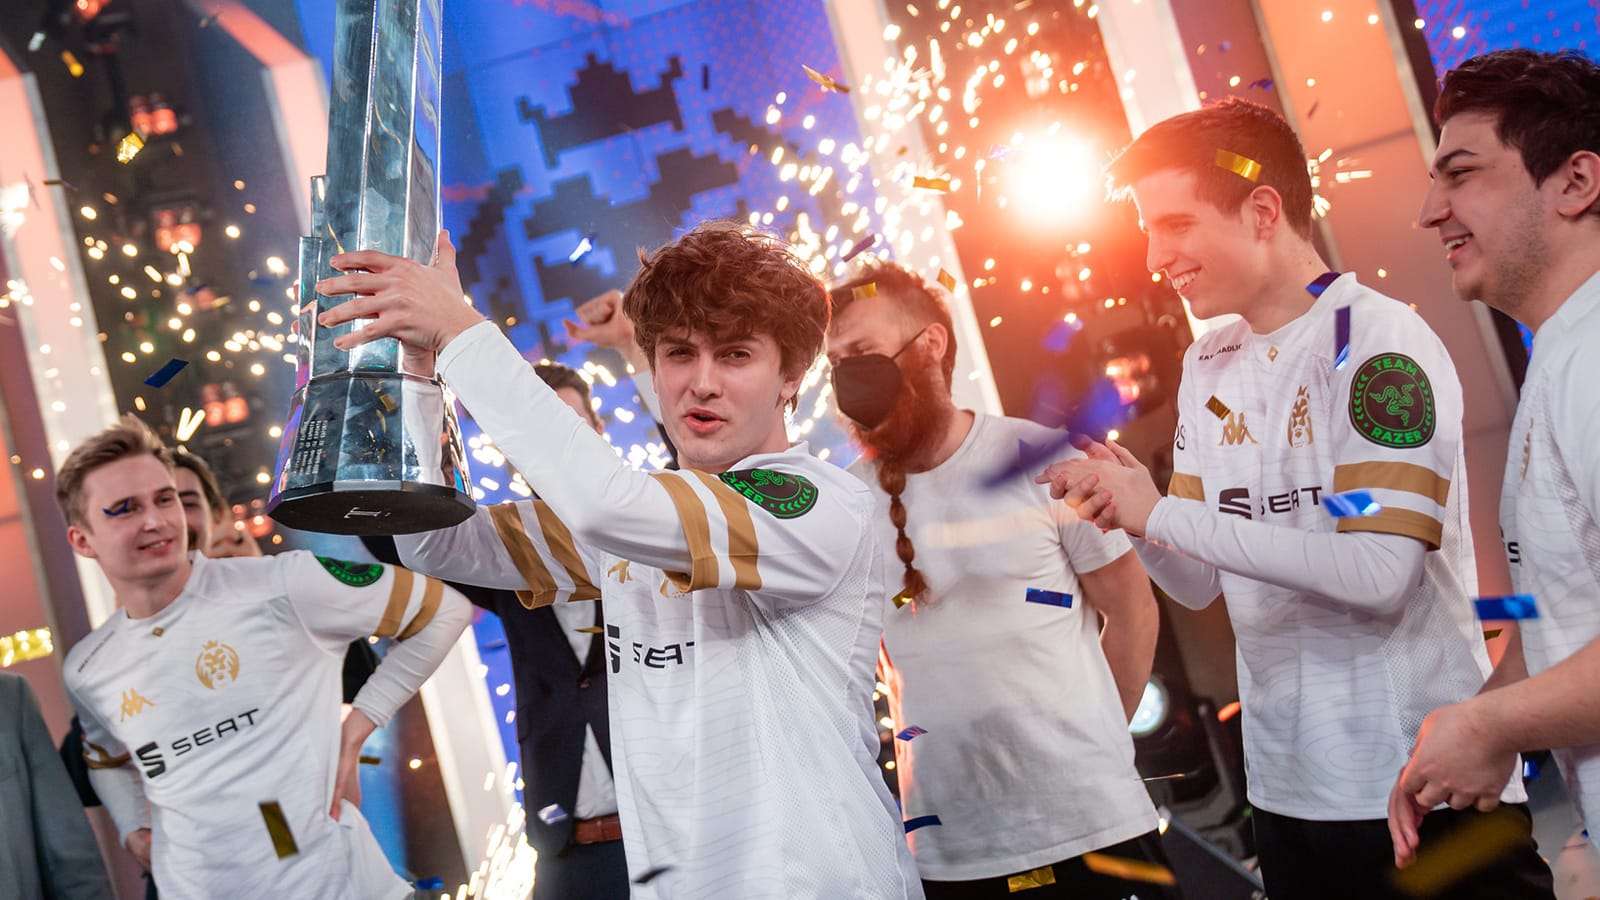 MAD Lions reverse sweep Rogue to win maiden LEC Spring 2021 title.